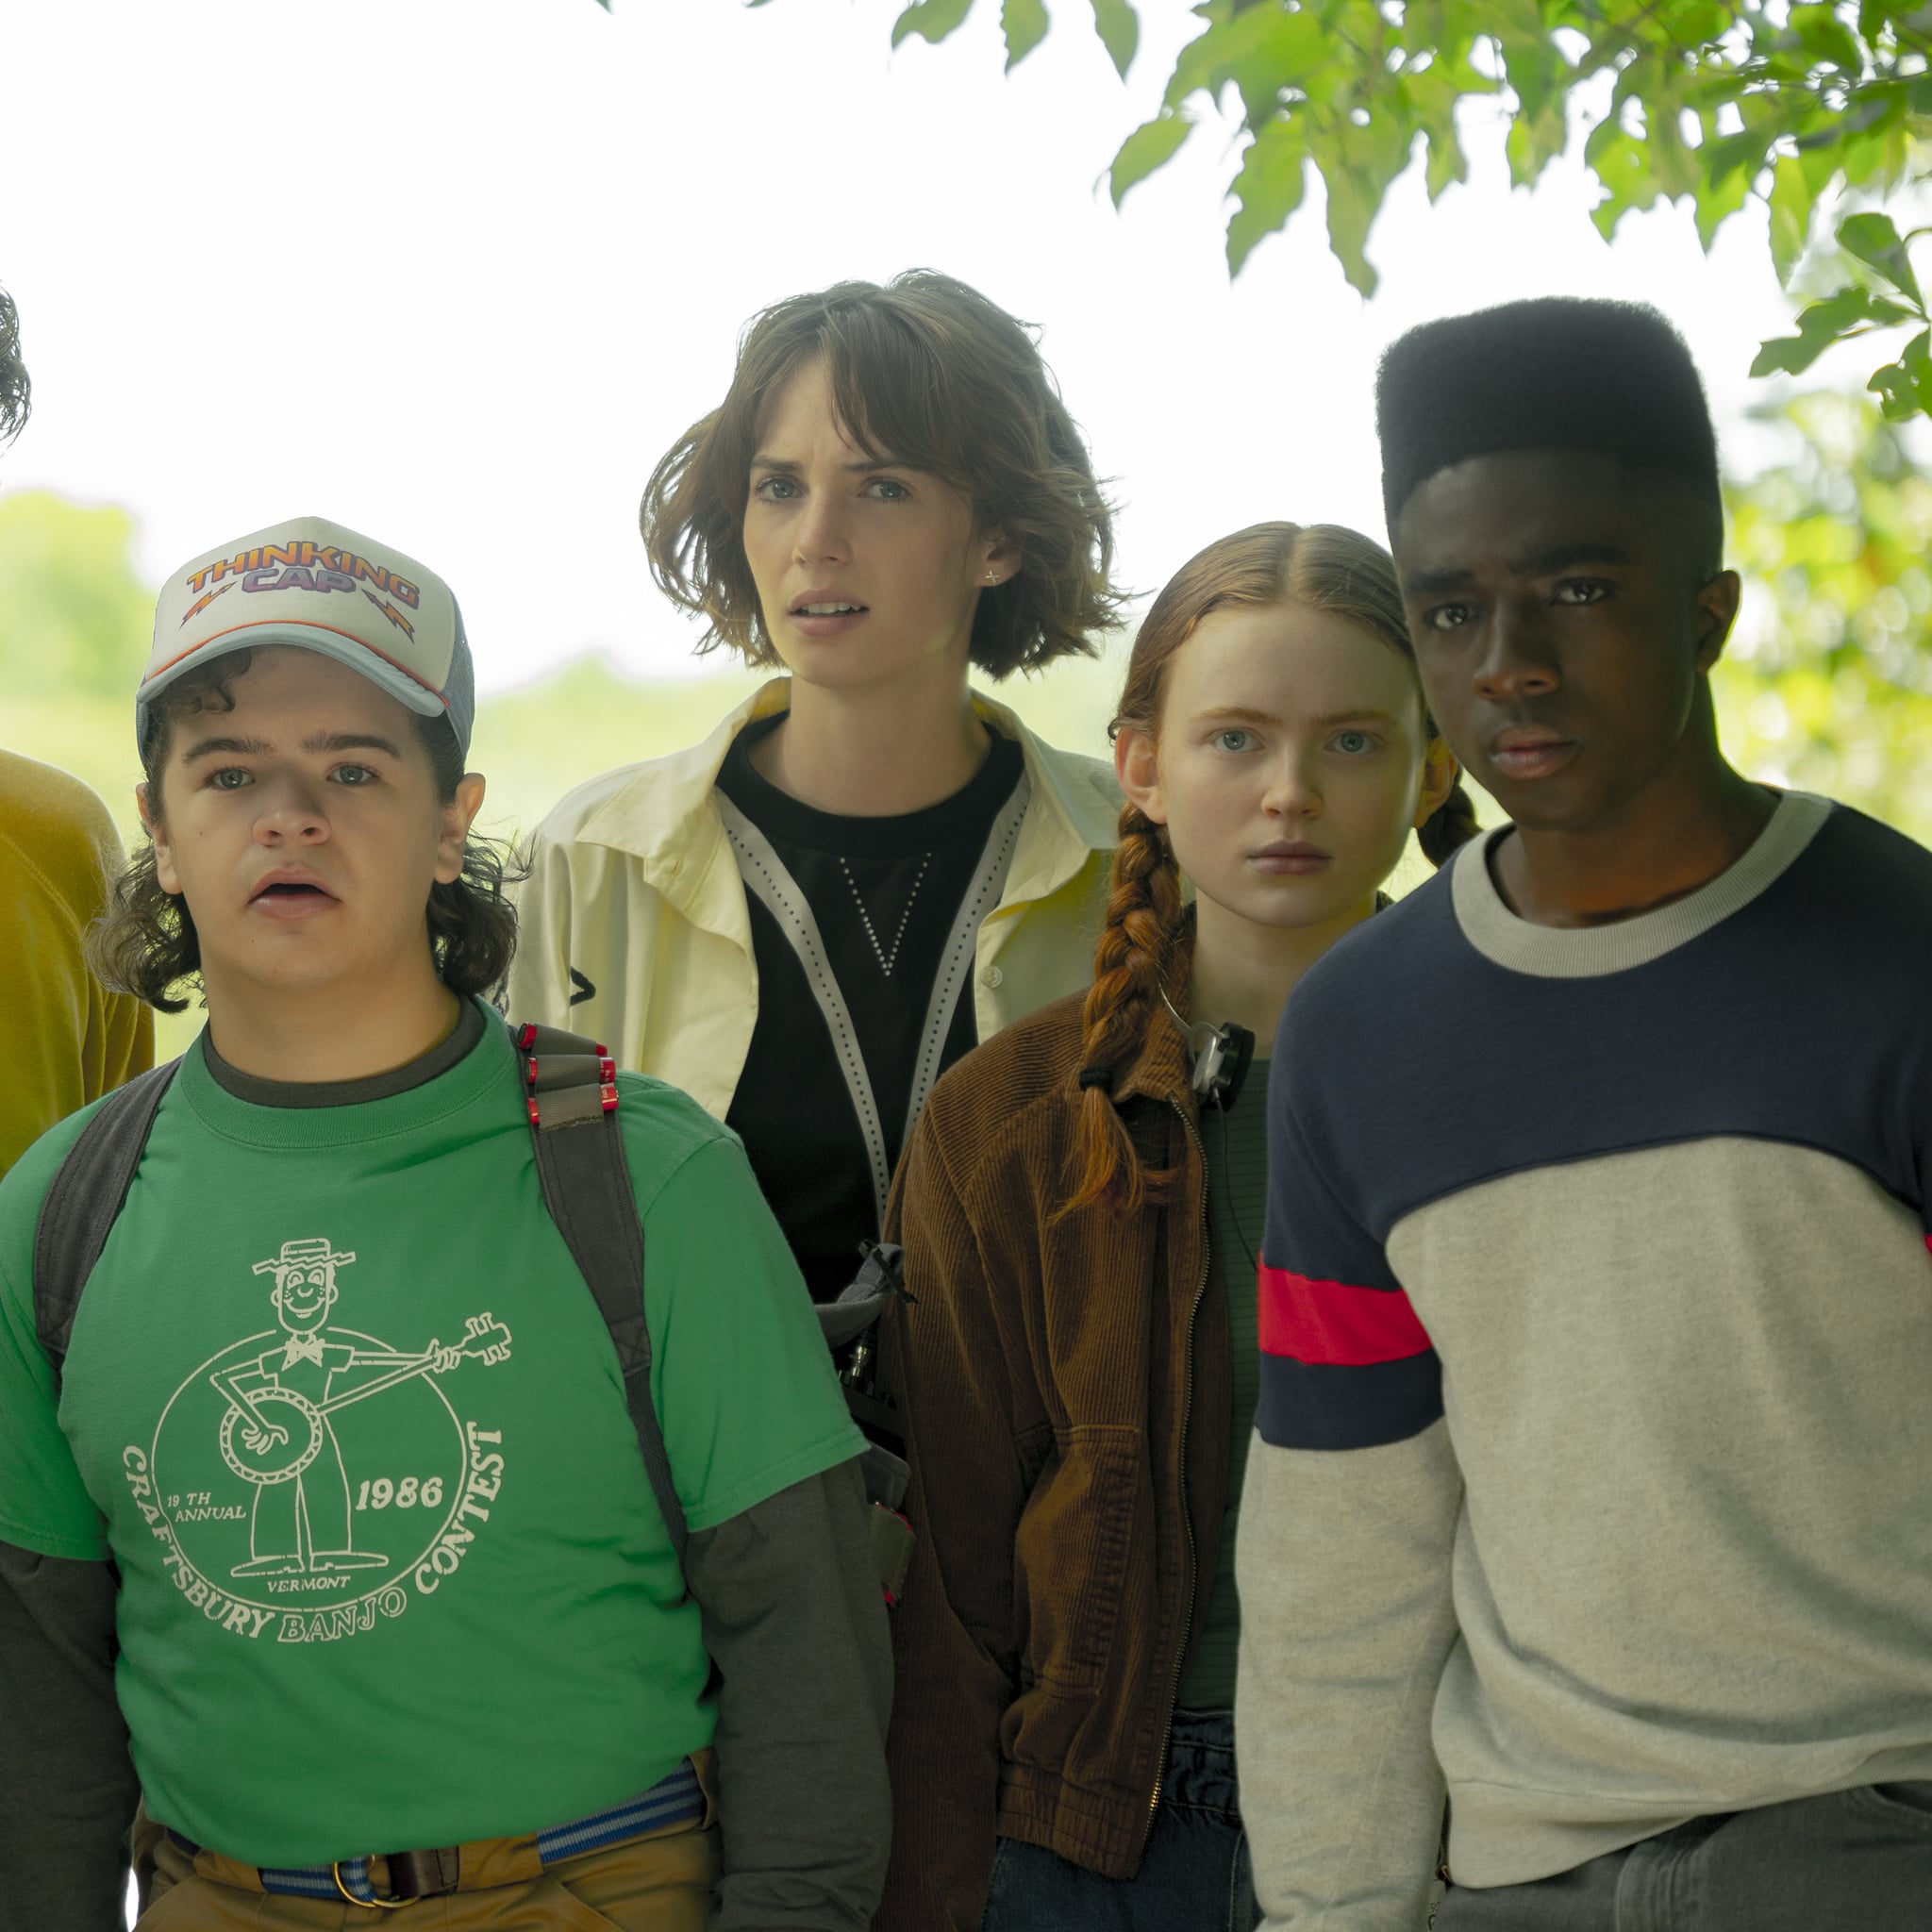 Stranger Things' Season 4 Behind-the-Scenes Photos: Pictures!